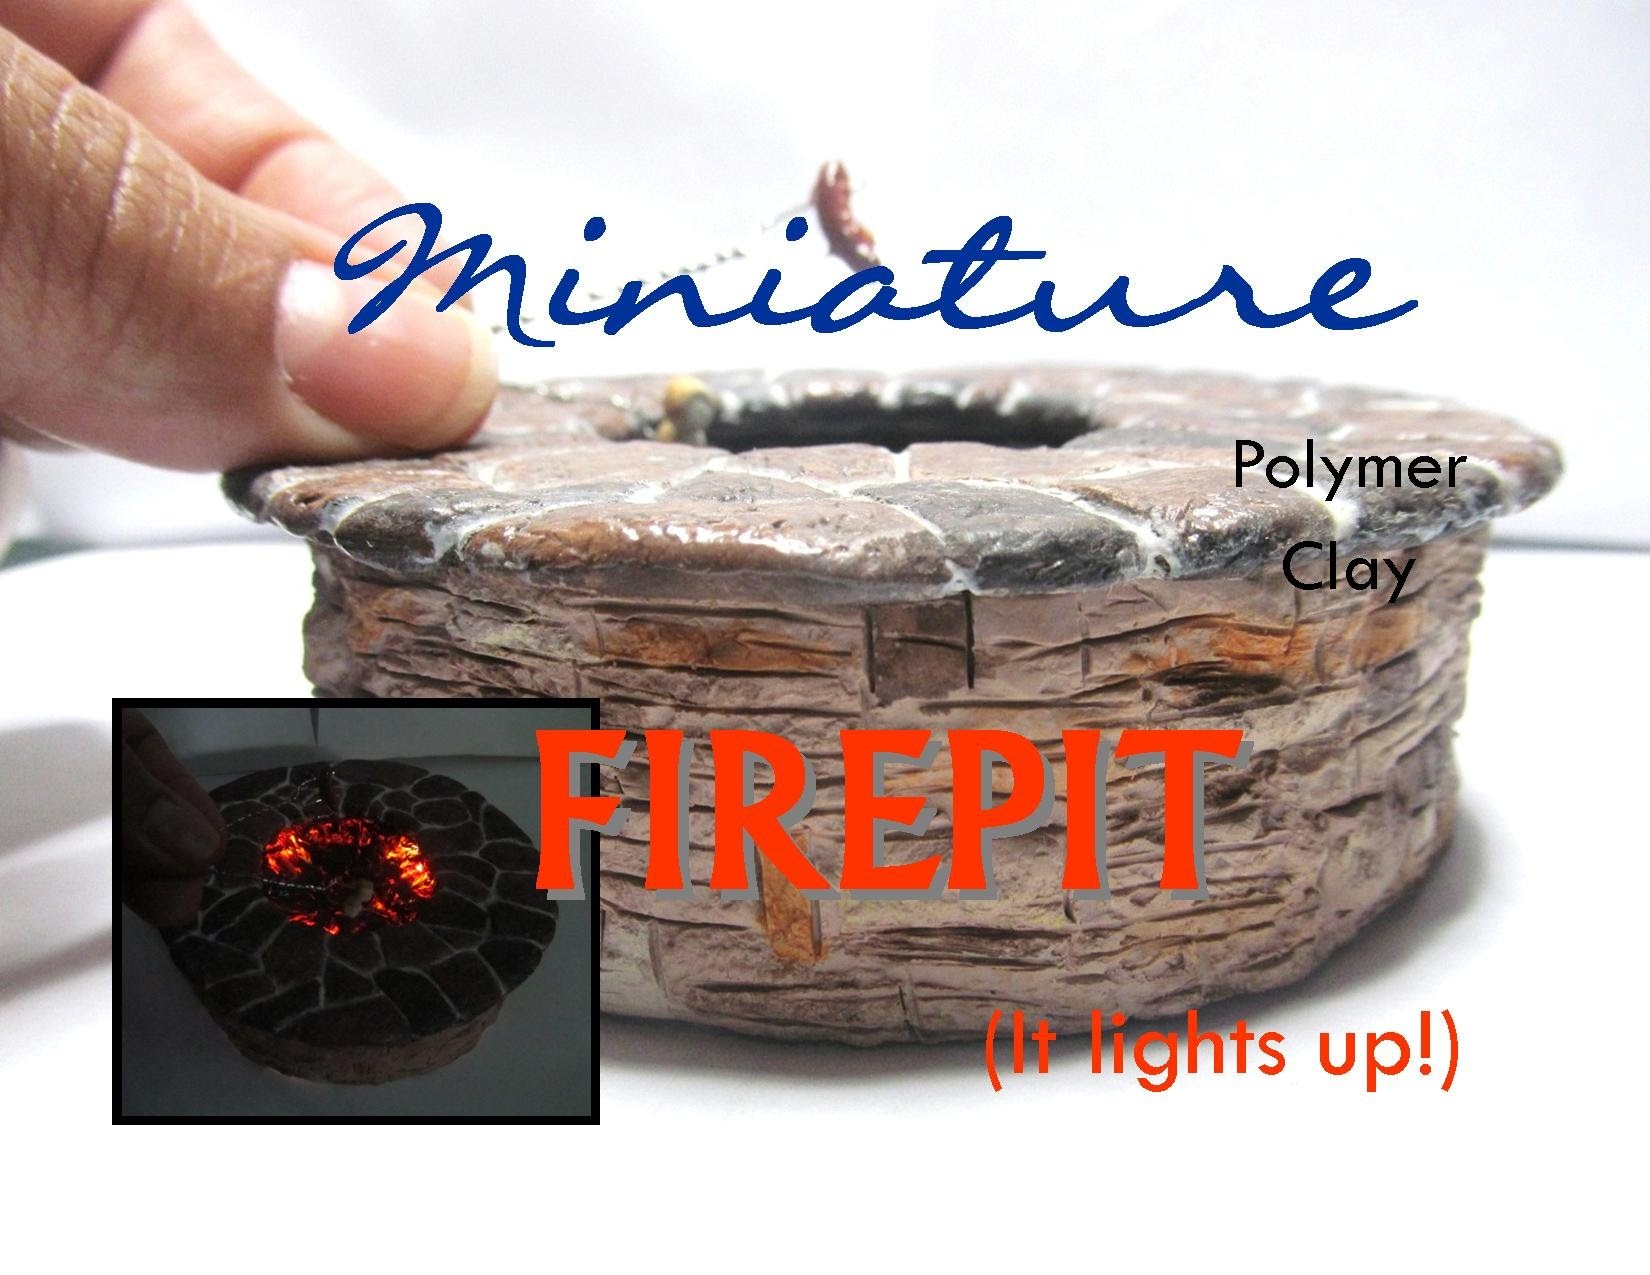 Firepit (Lights Up) from Polymer Clay Dollhouse Miniature